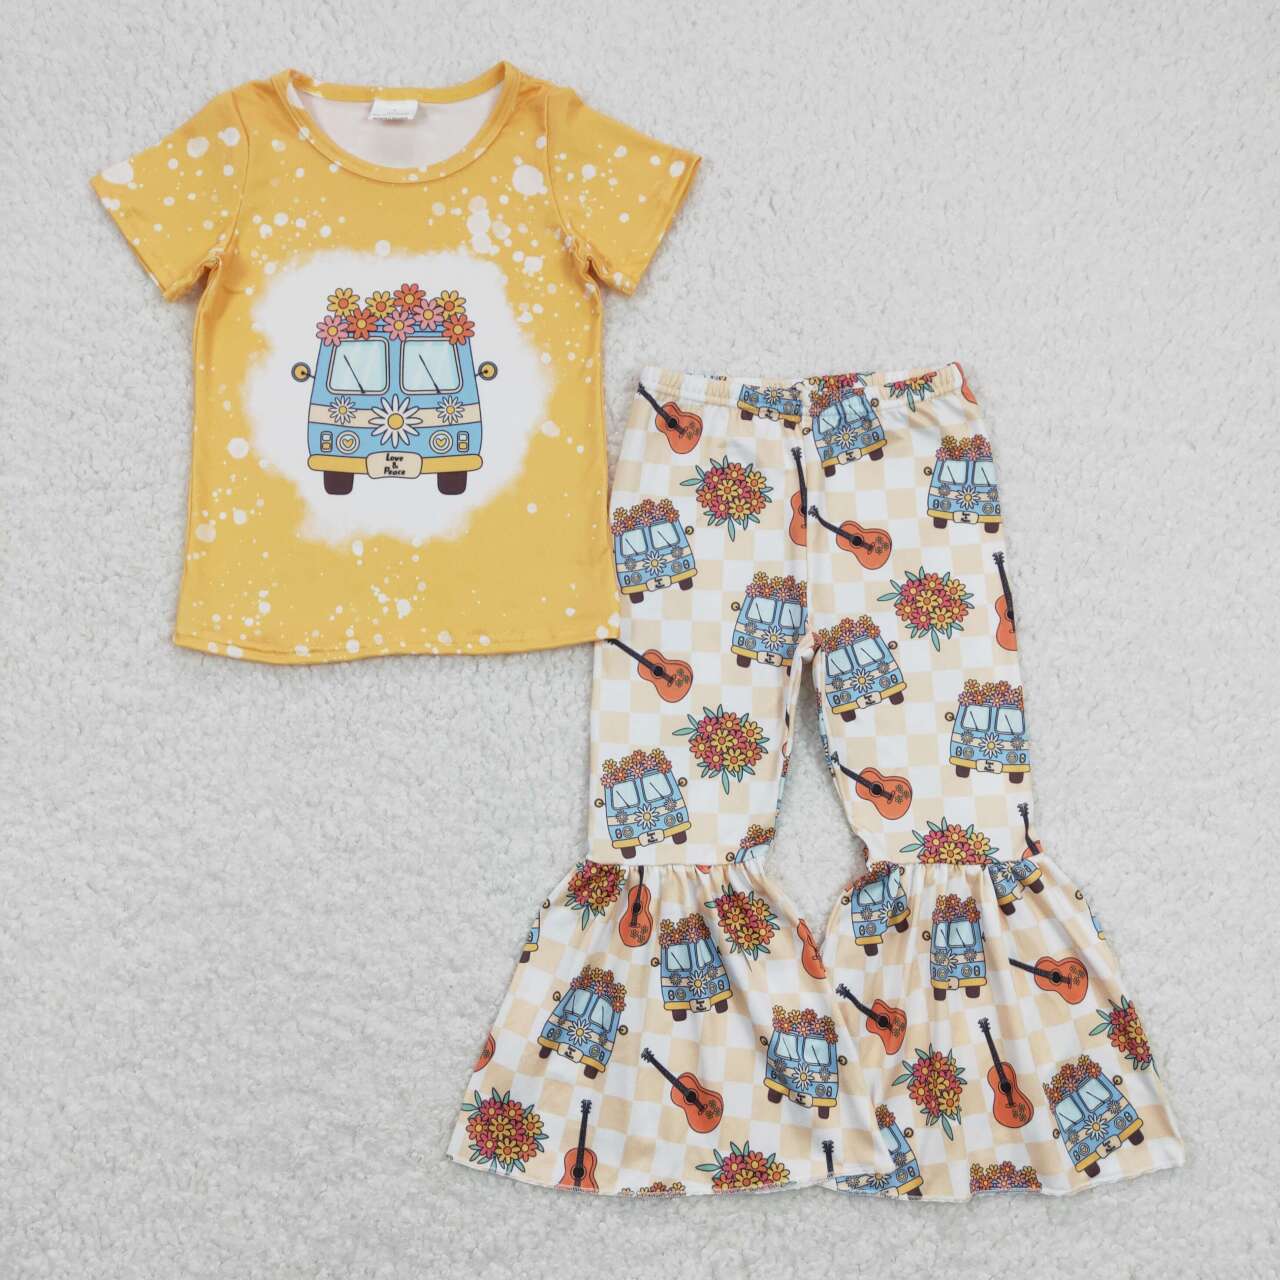 GSPO1369 baby girl clothes guitar bus girls bell bottoms outfit yellow back to school clothes